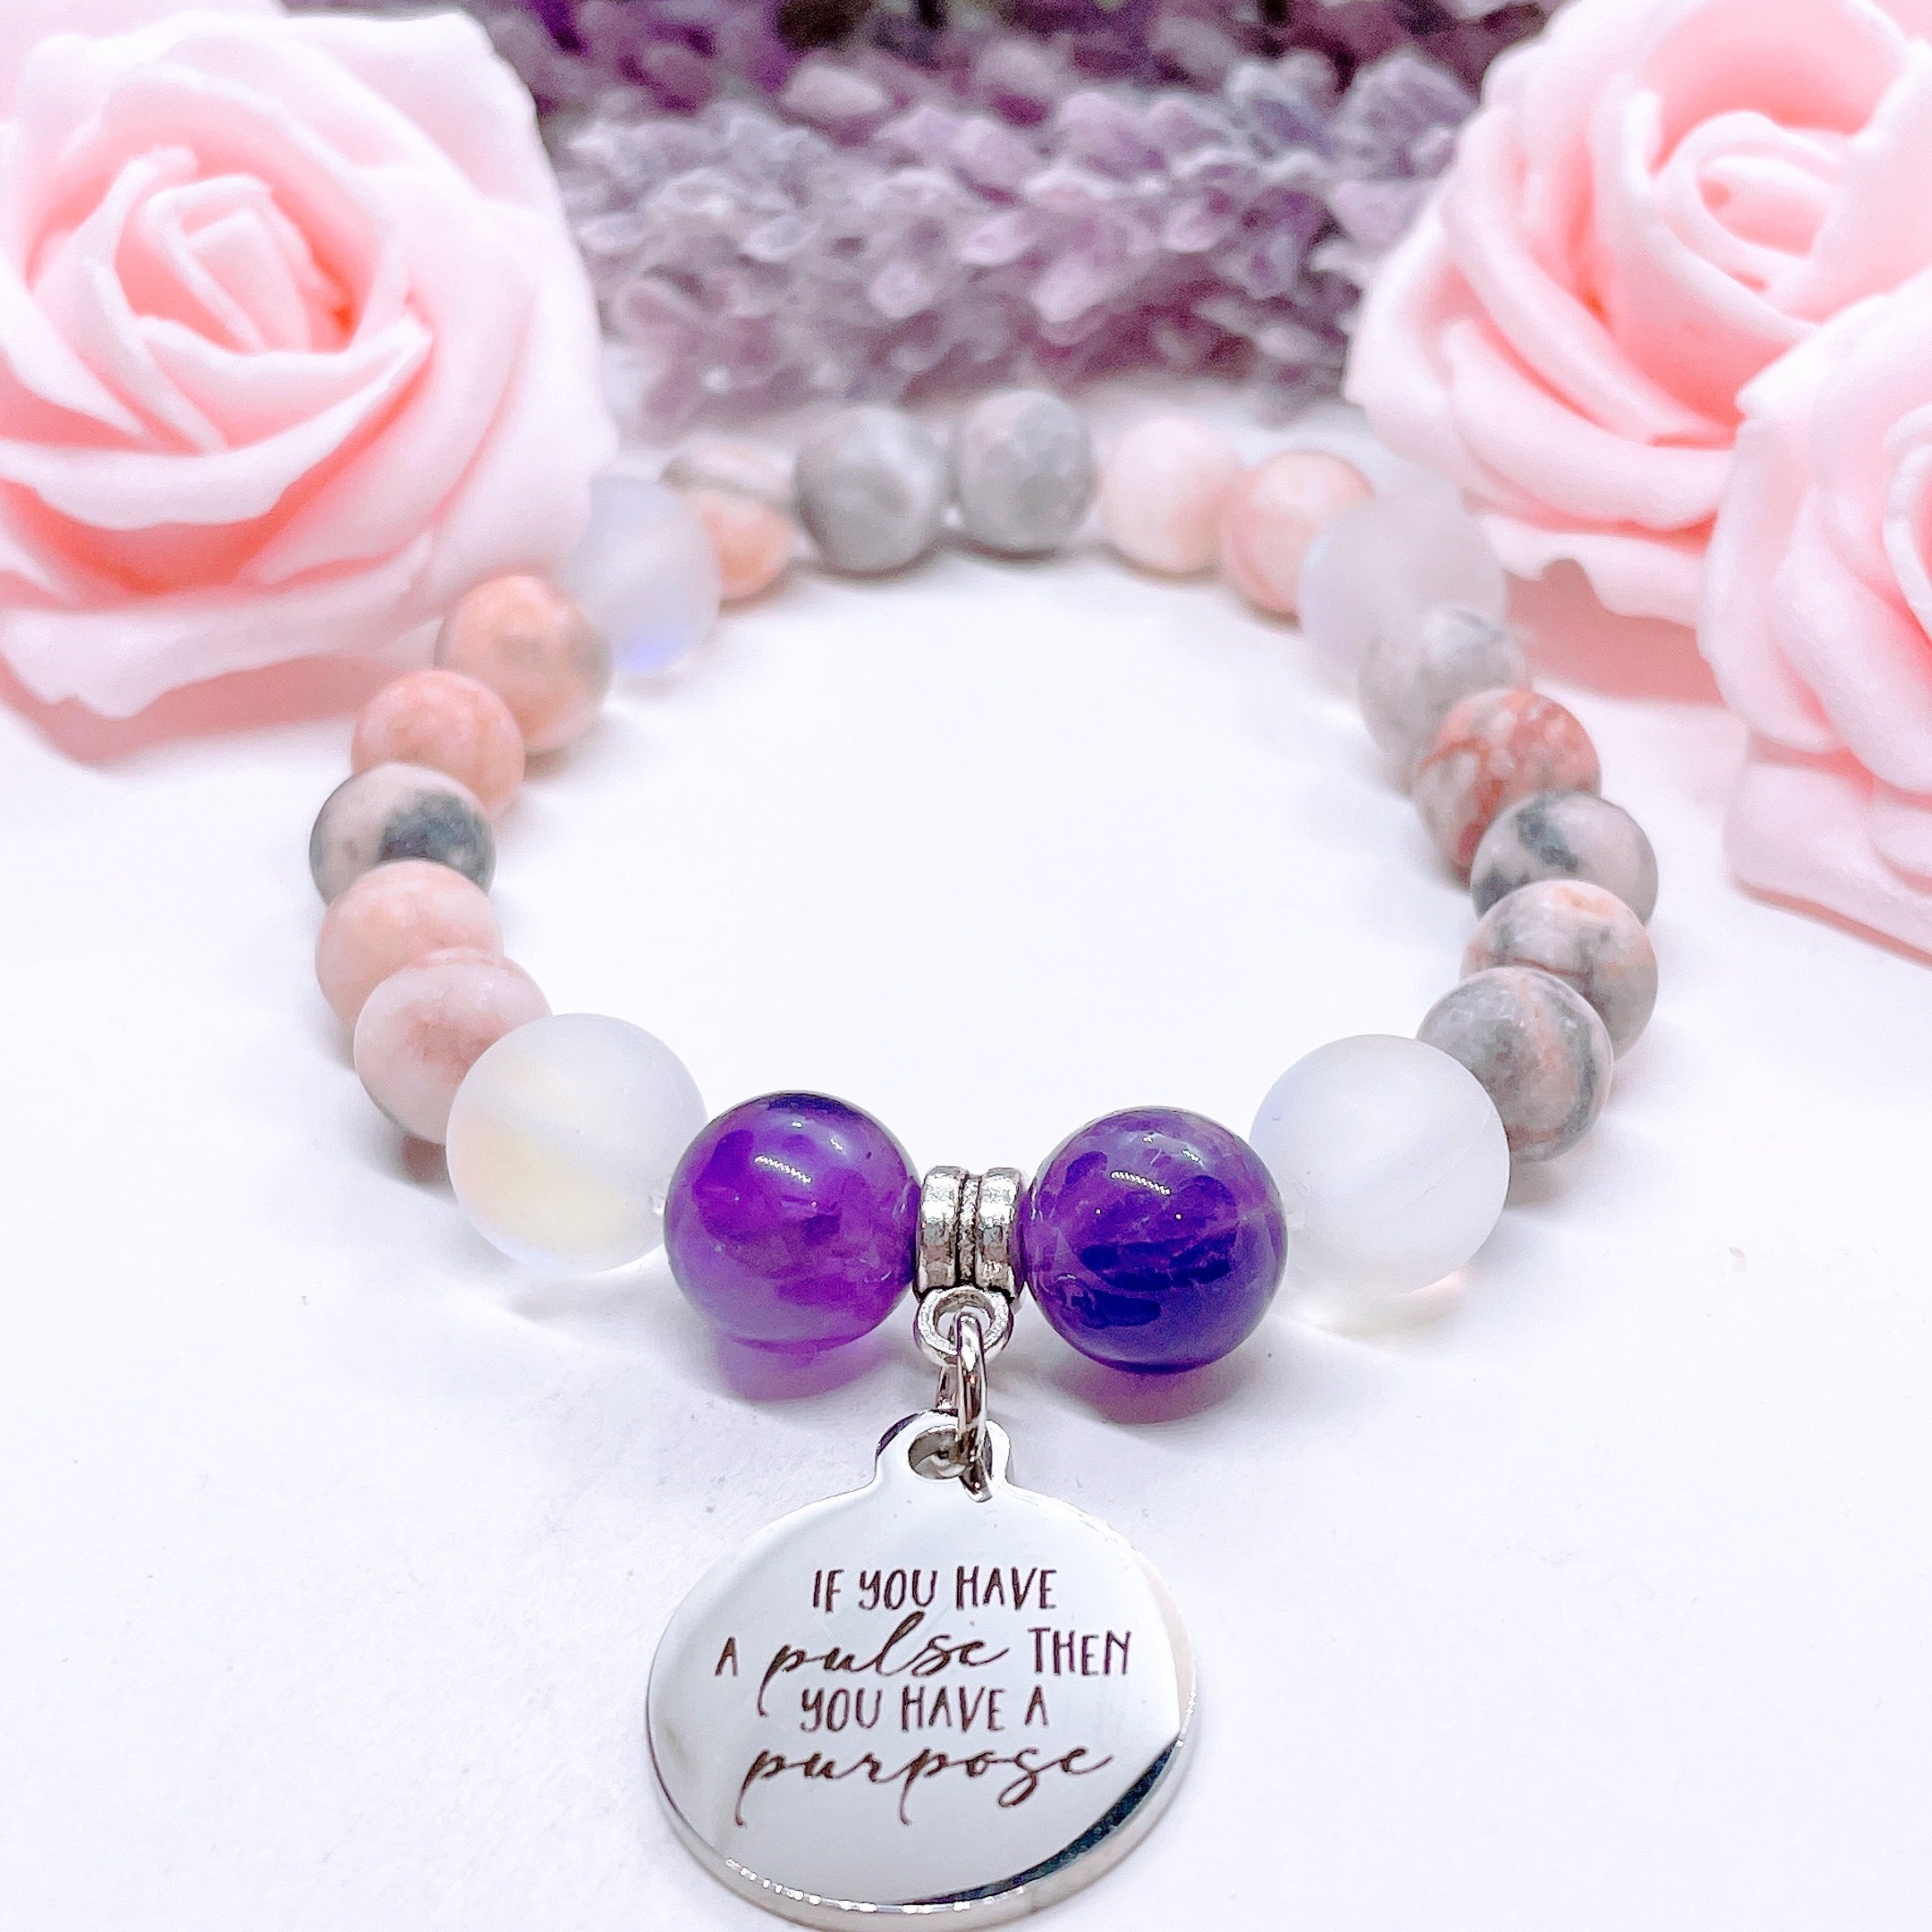 If You Have a Pulse You Have a Purpose Charm Bracelet